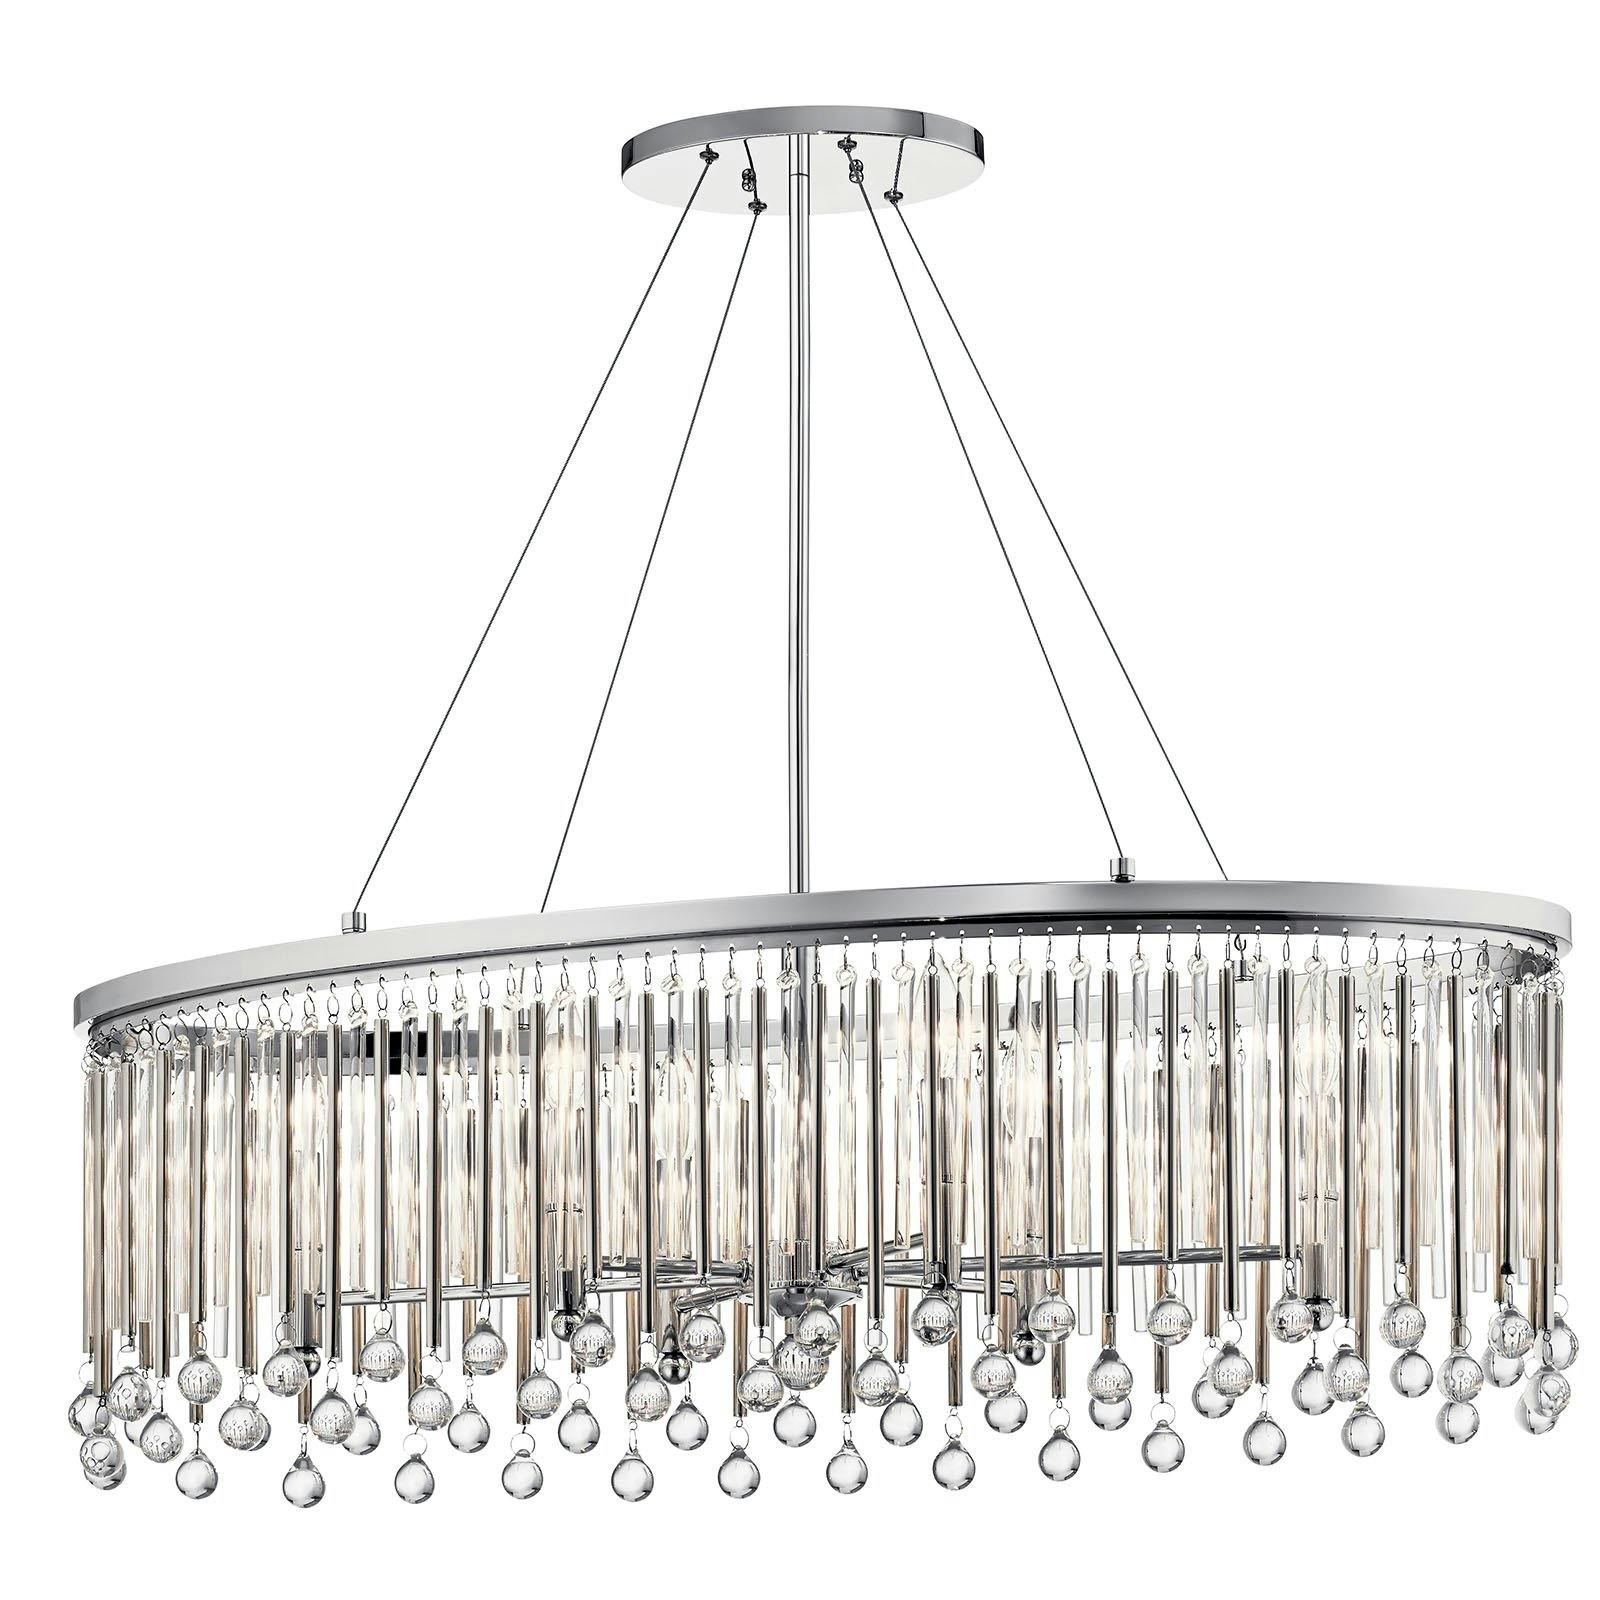 Piper 6 Light Oval Chandelier Chrome on a white background